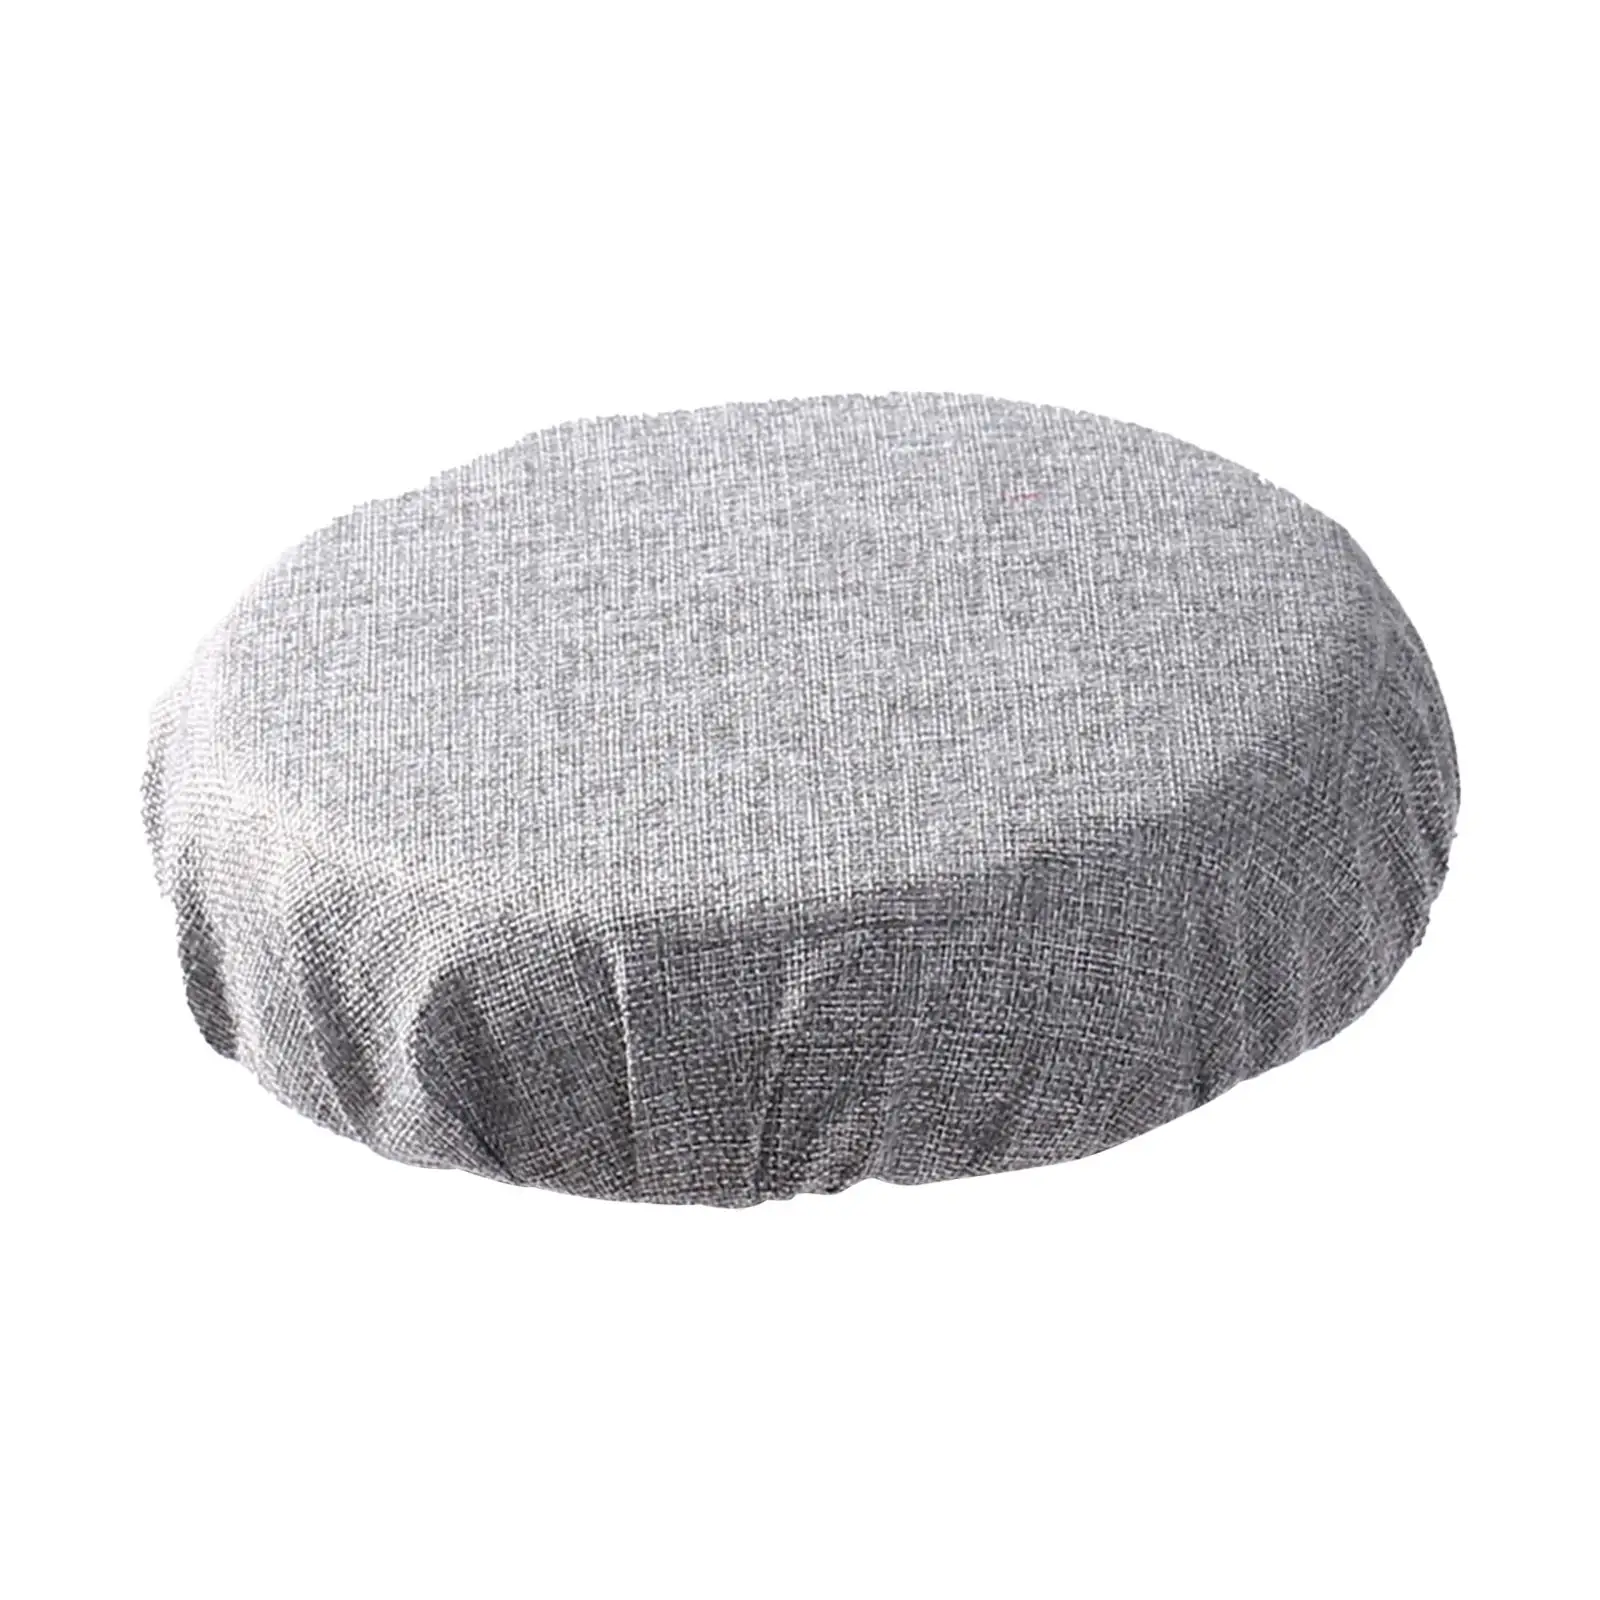 Seat Cushion for Chair Gardening BBQ Porch Camping Collapsible Stool Cushion